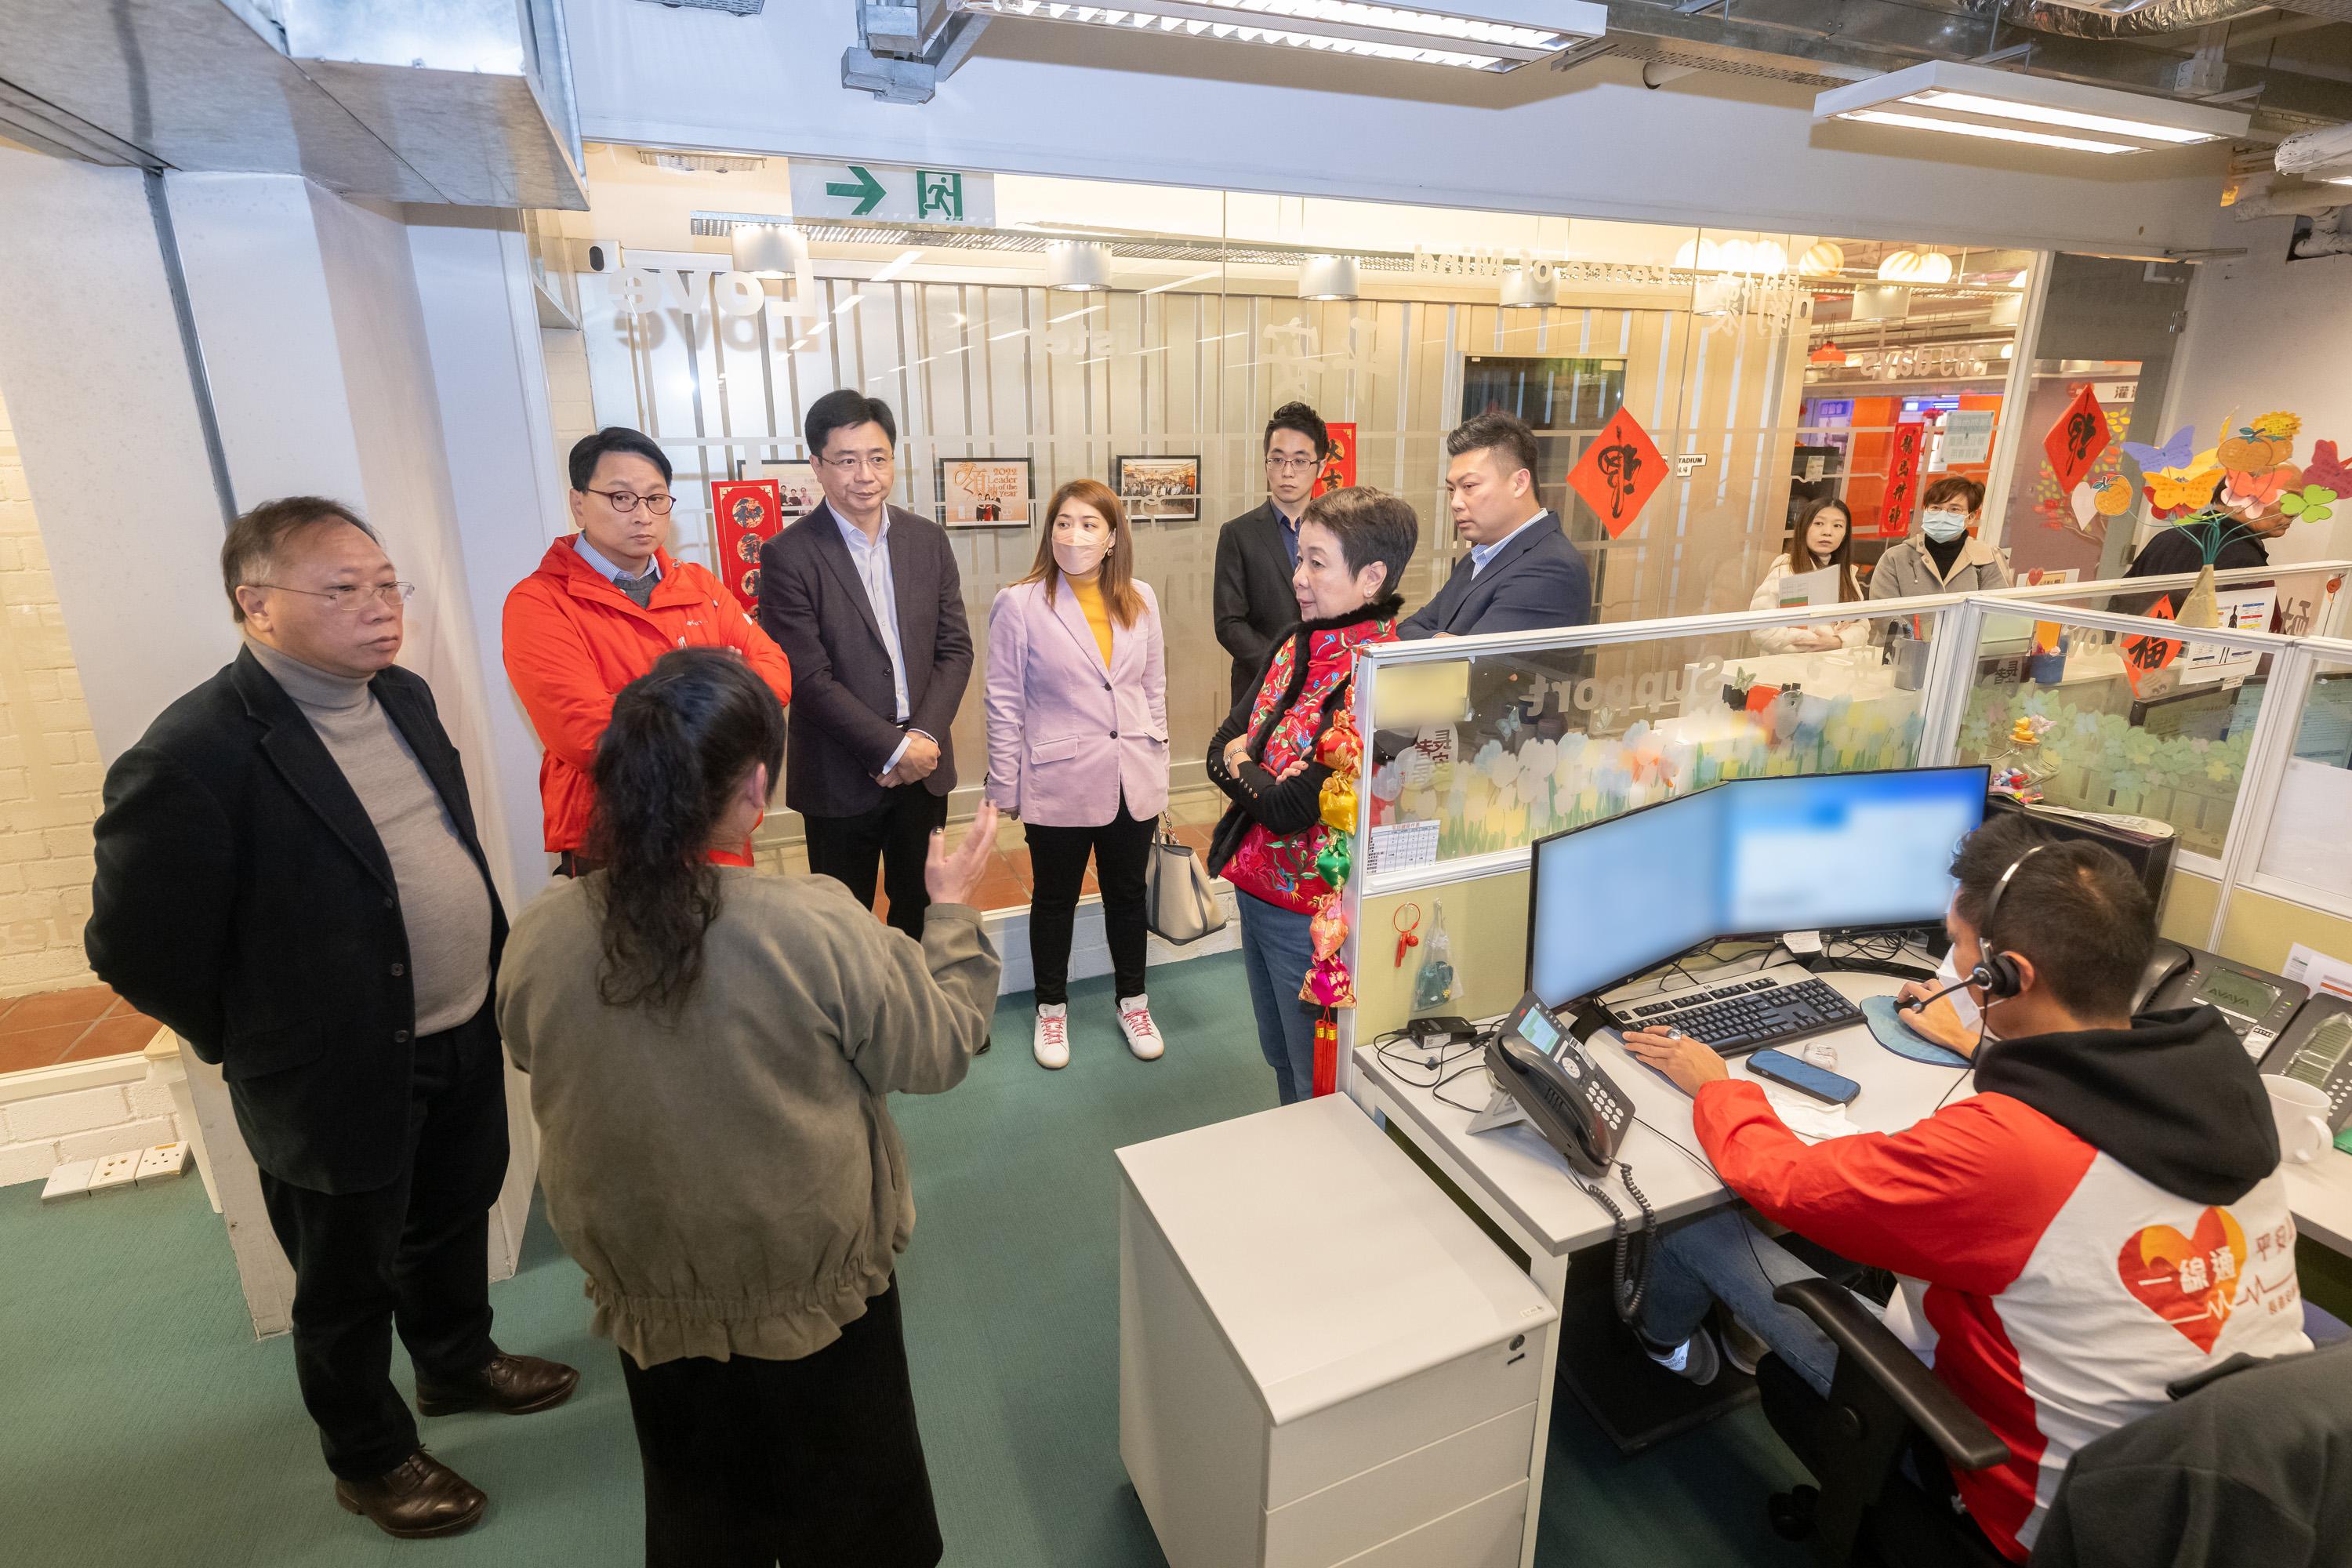 The Legislative Council Panel on Welfare Services visits the call centre of Care-On-Call Service under Senior Citizen Home Safety Association (SCHSA) today (February 8). Photos shows Members visiting the facilities of SCHSA.